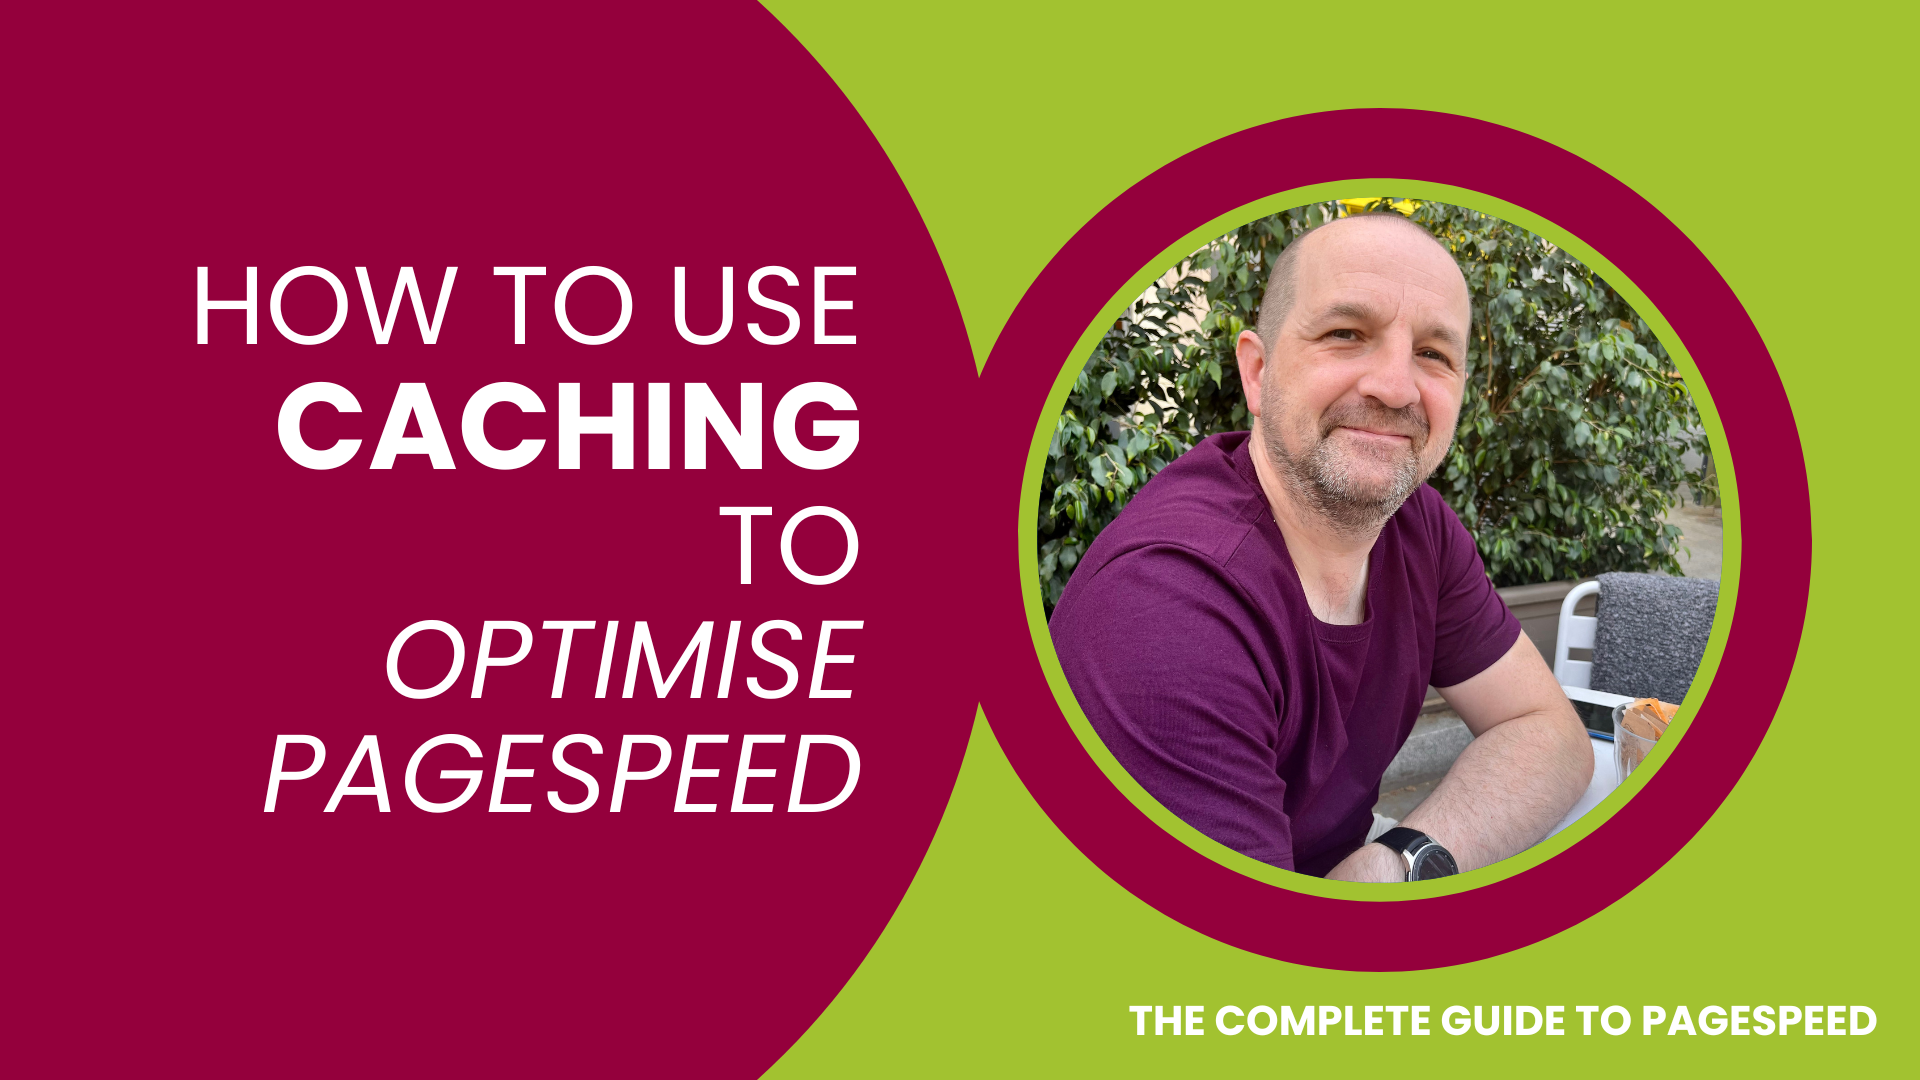 How to Use Caching to Optimise Pagespeed